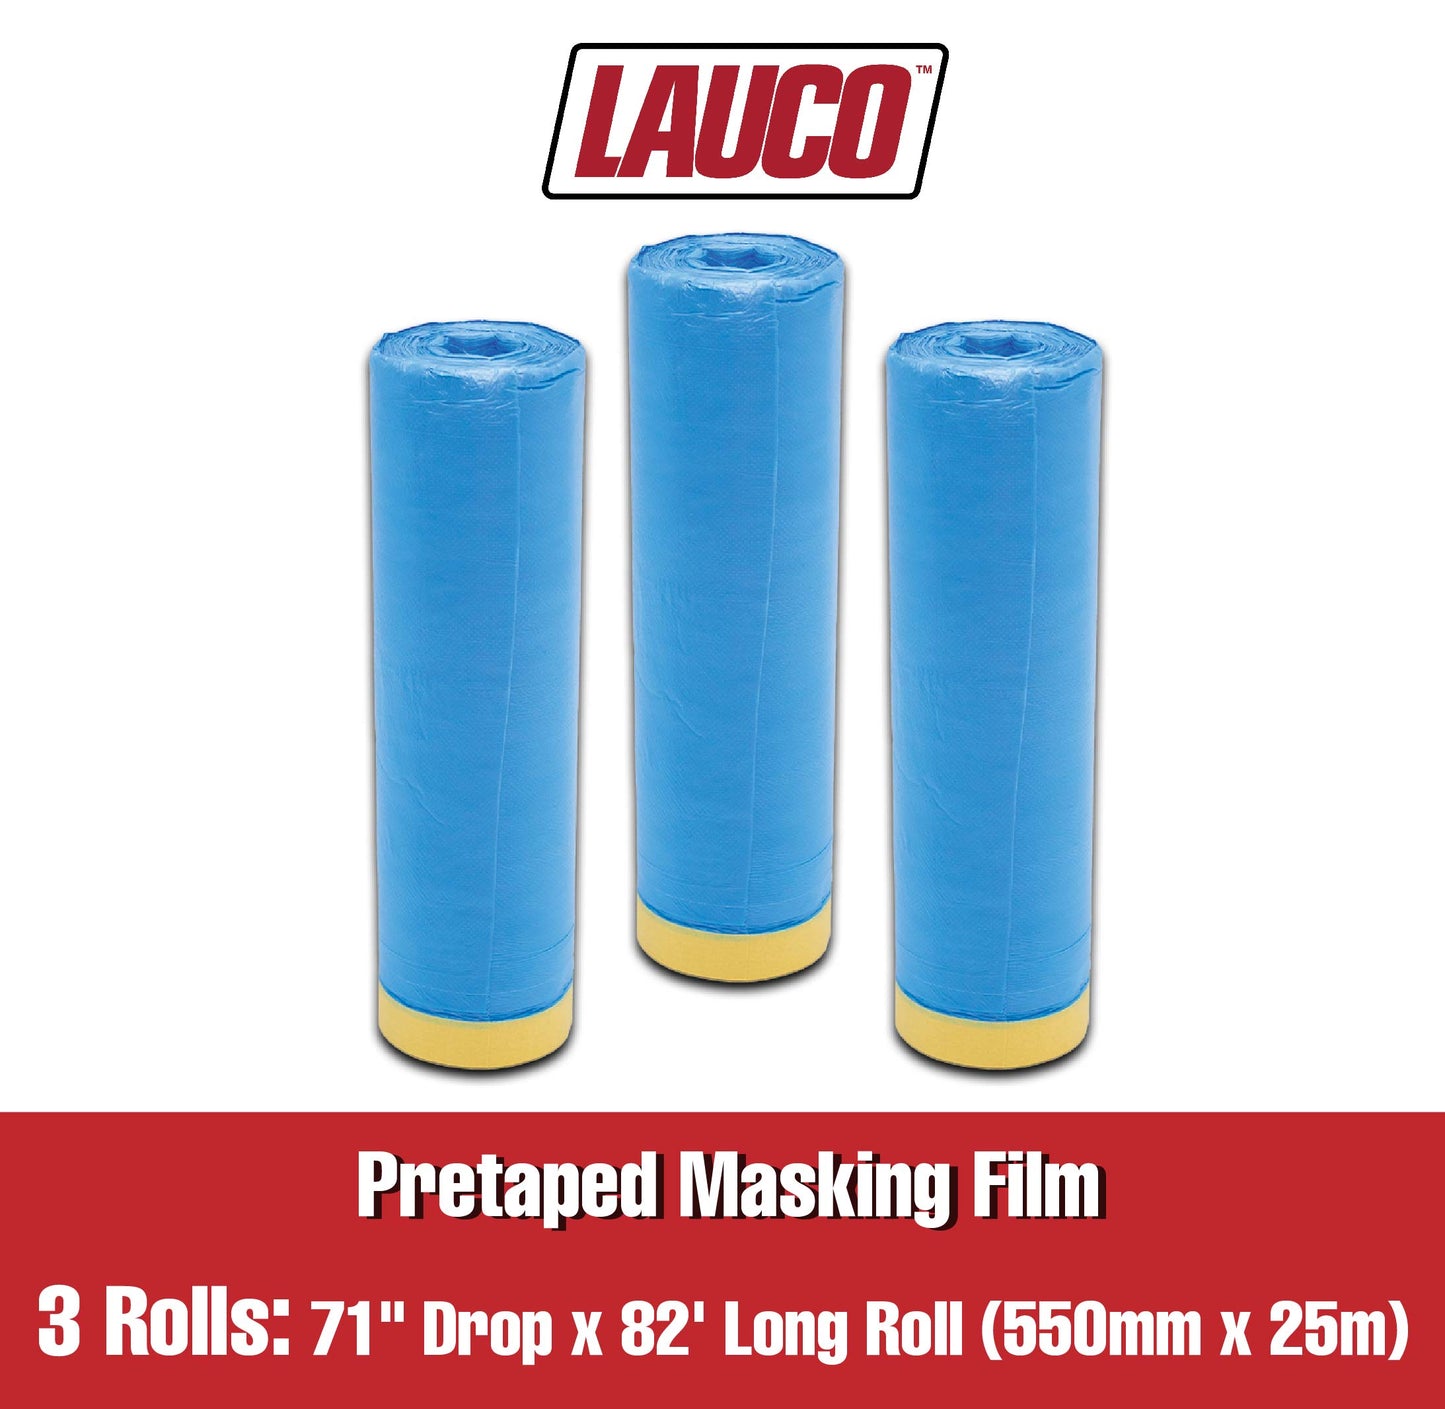 2-Piece Set Tape and Drape, Assorted Masking Film Paper for